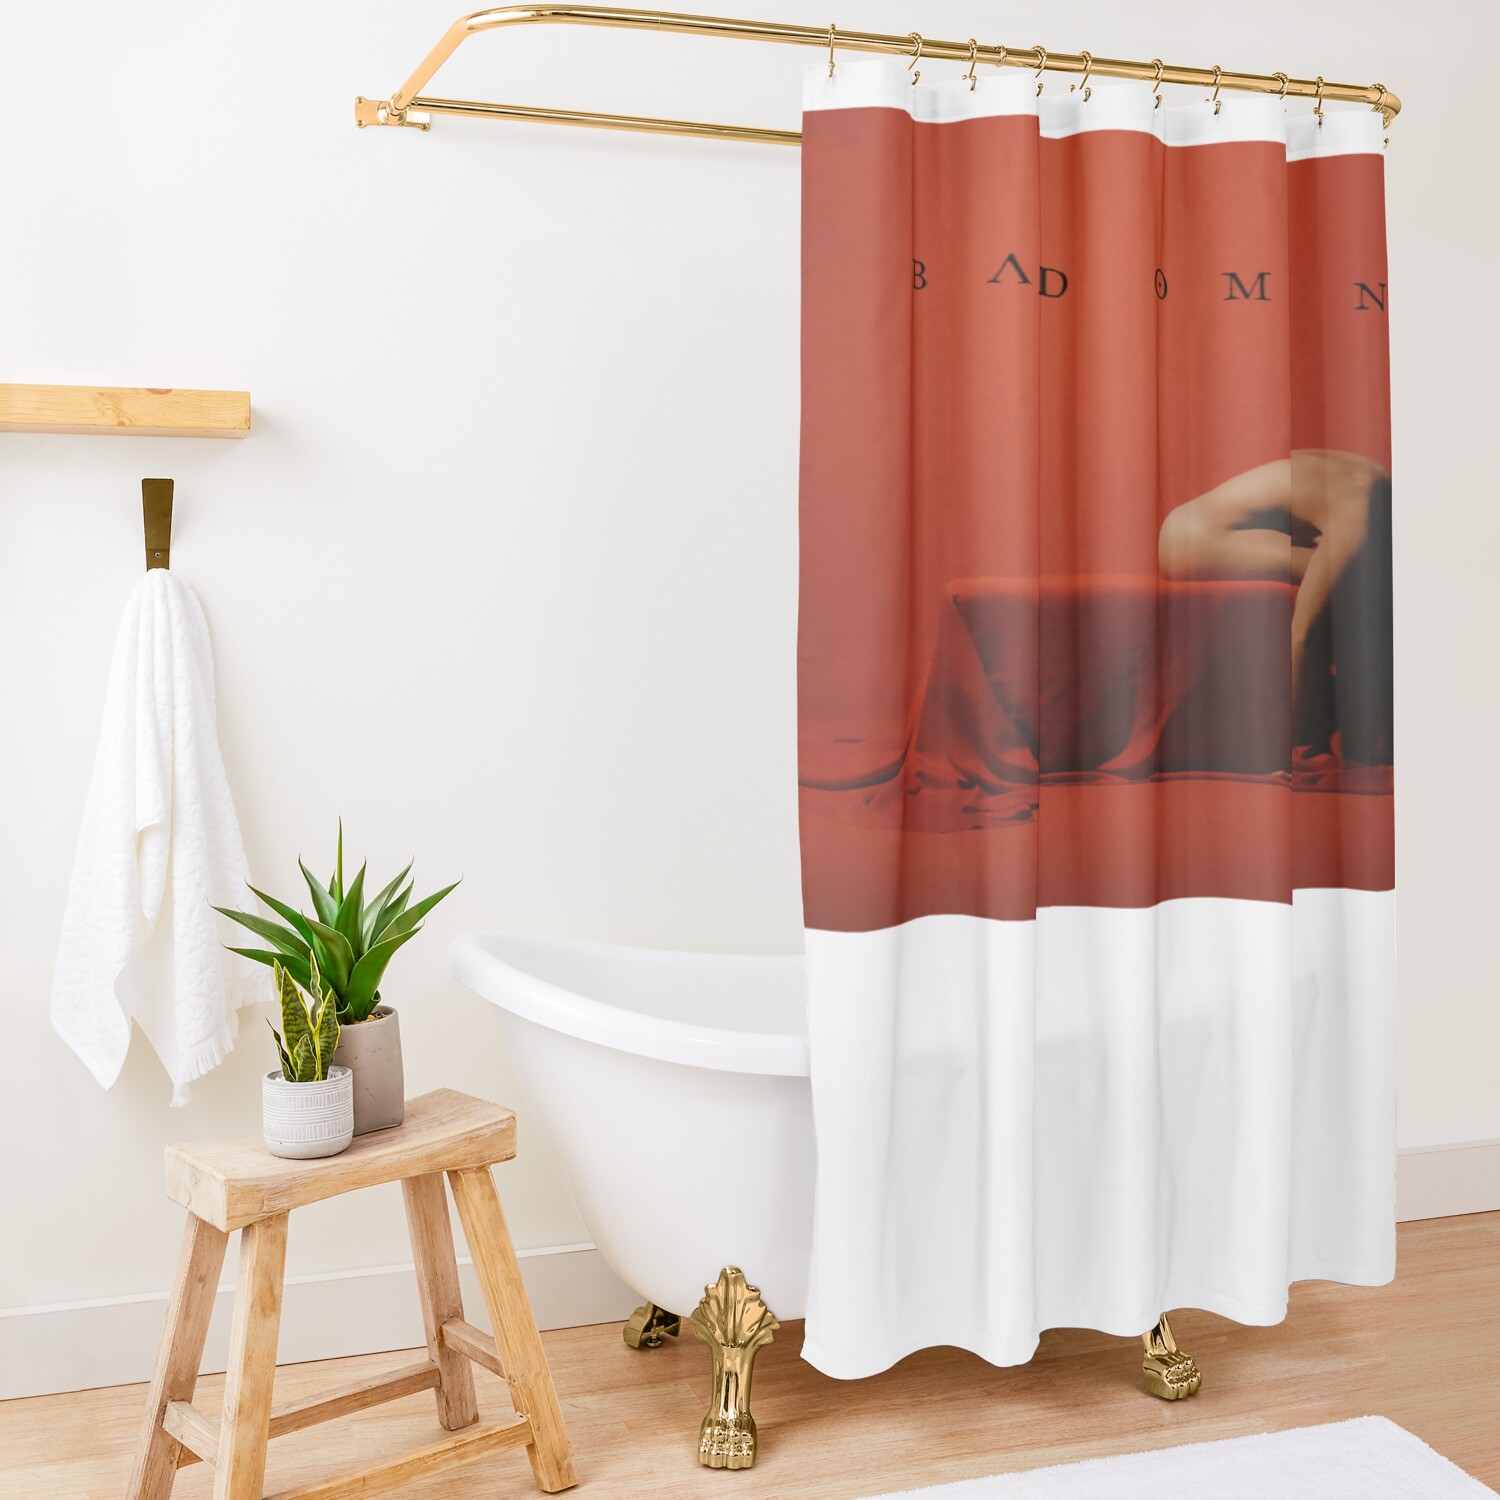 urshower curtain opensquare1500x1500 12 - Bad Omens Shop